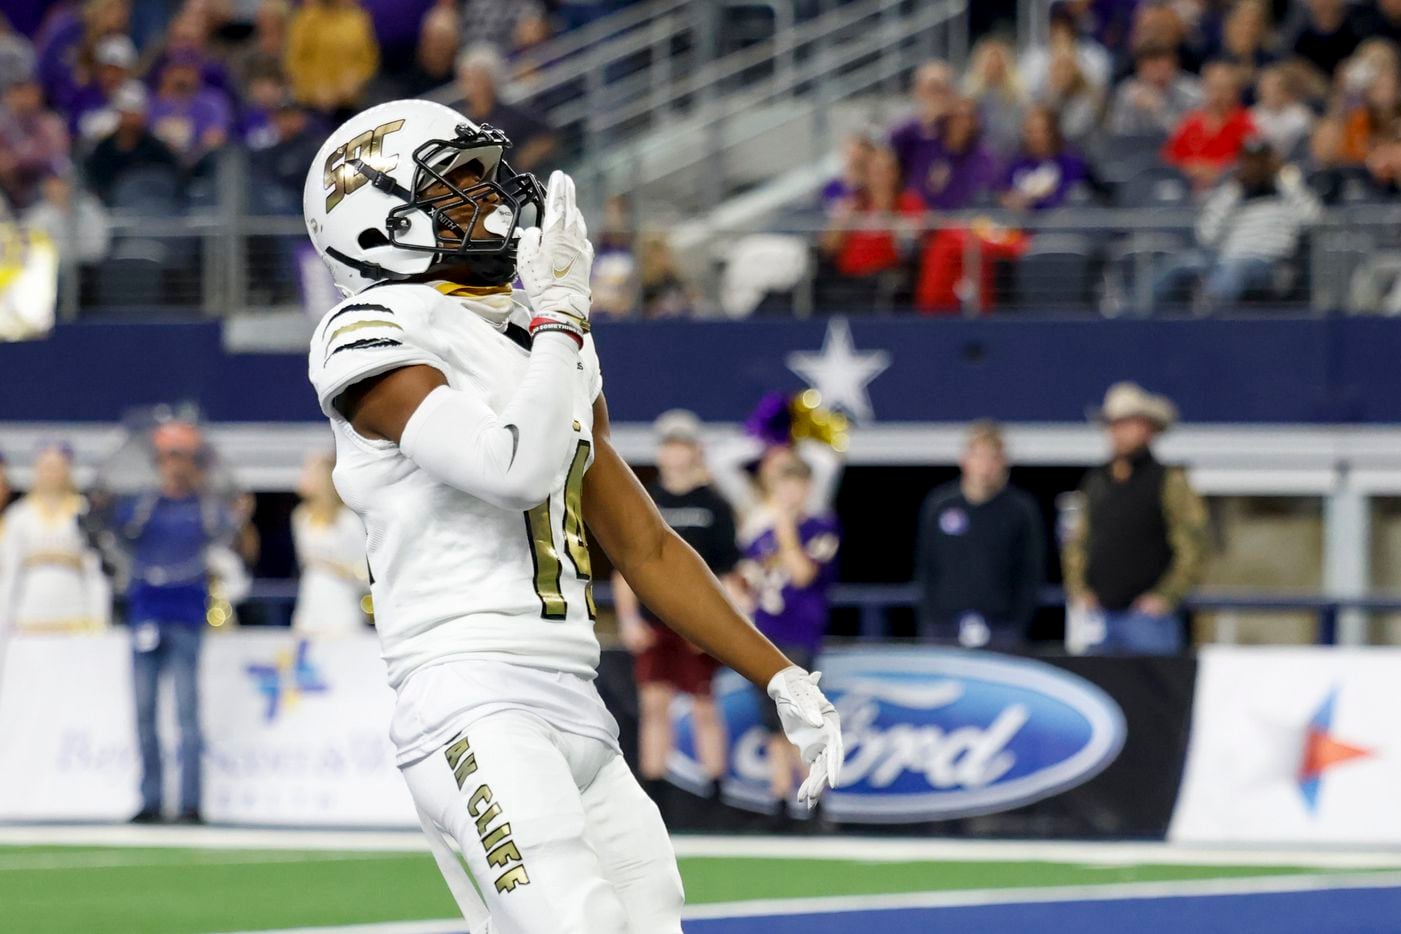 South Oak Cliff wide receiver Corinthean Coleman (14) celebrates after catching a touchdown pass from South Oak Cliff quarterback Kevin Henry-Jennings (8) nduring the first quarter of their Class 5A Division II state championship game at AT&T Stadium in Arlington, Saturday, Dec. 18, 2021. (Elias Valverde II/The Dallas Morning News)